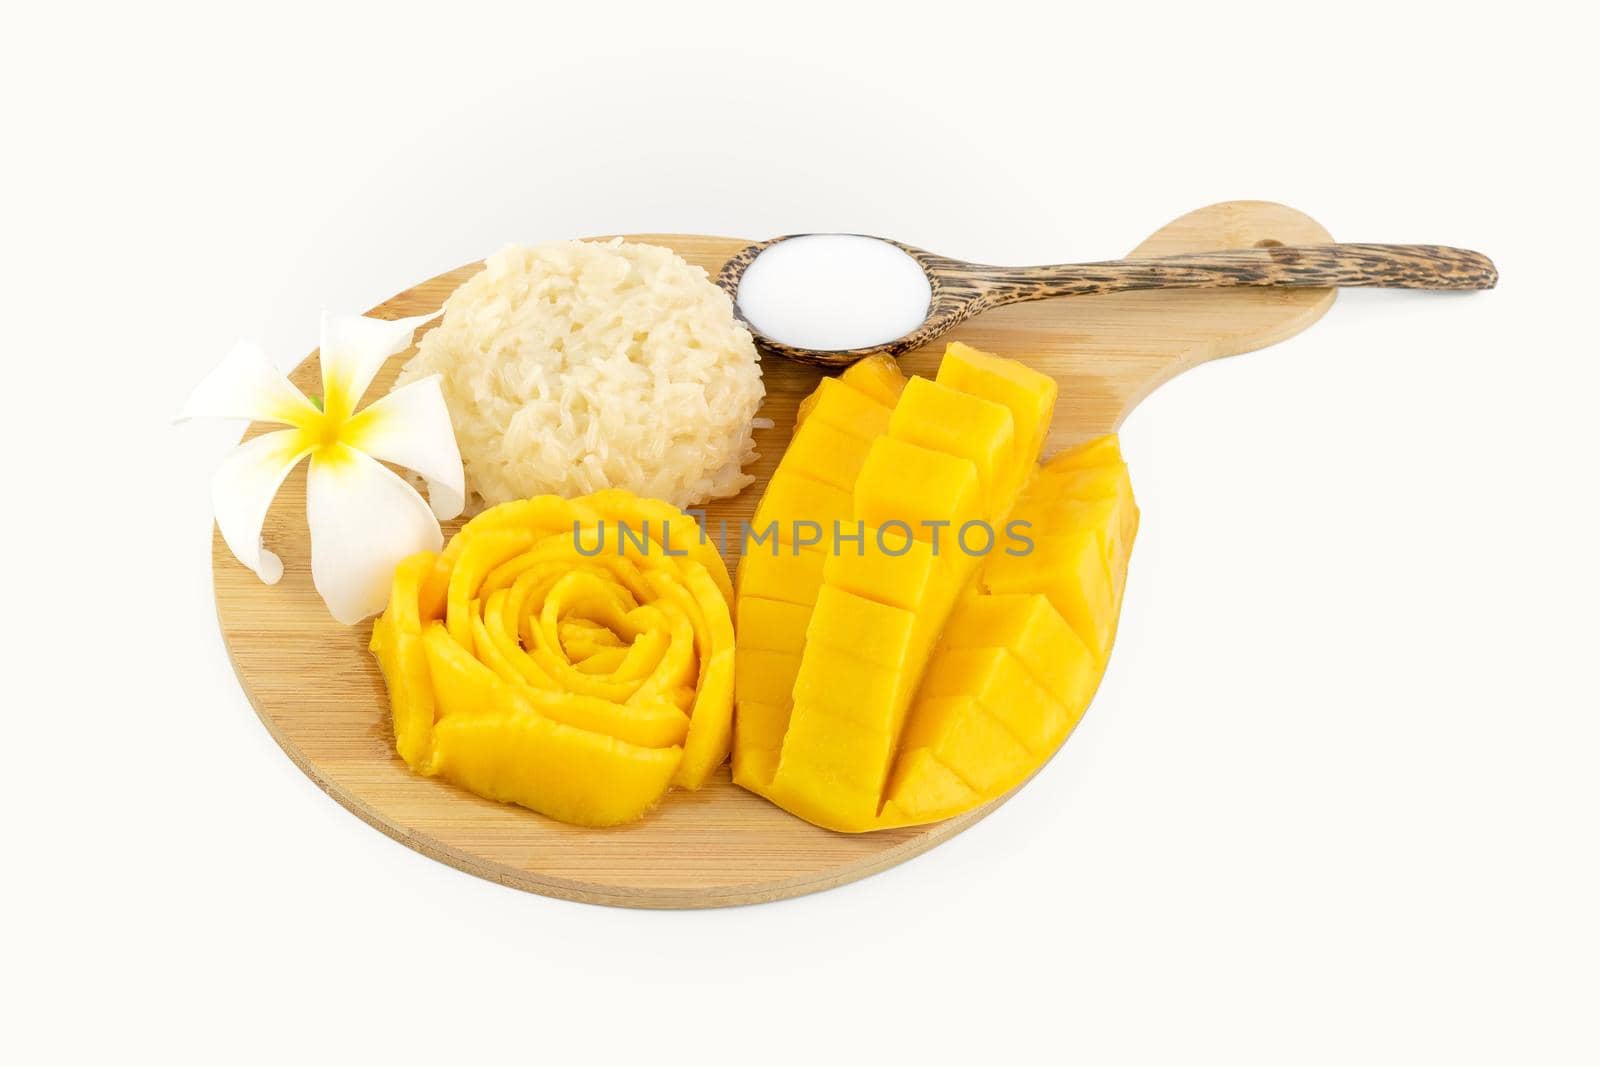 Mango Sticky Rice with flower on a wooden plate over white background by wattanaphob